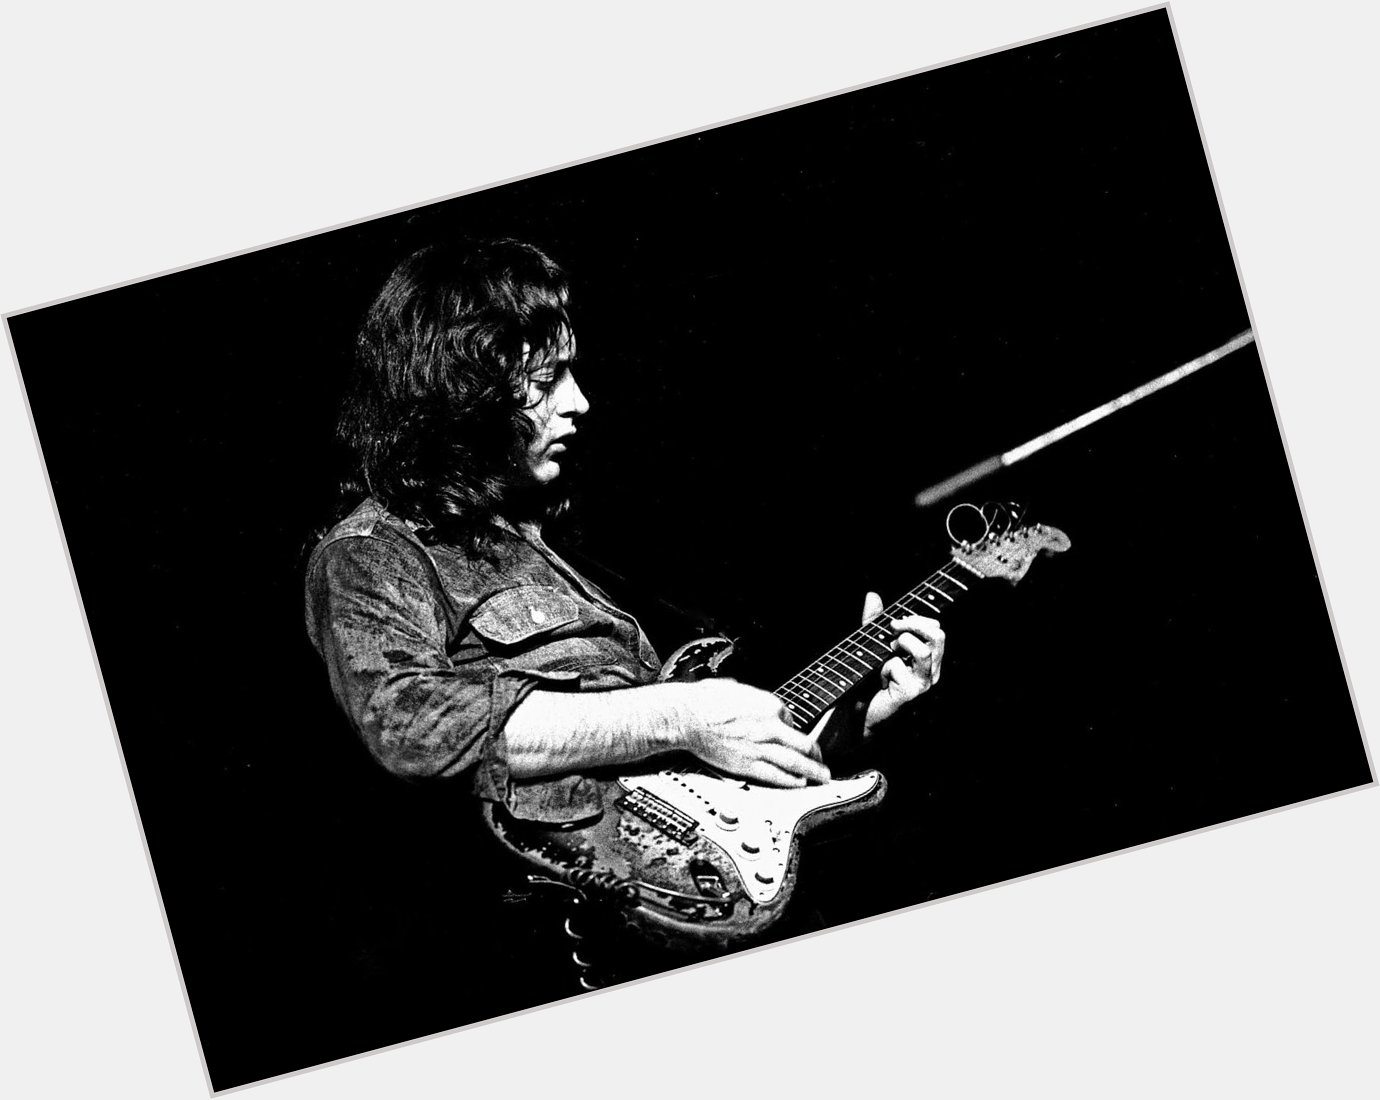 Happy Birthday Rory Gallagher
March 1948 - 14 June 1995 